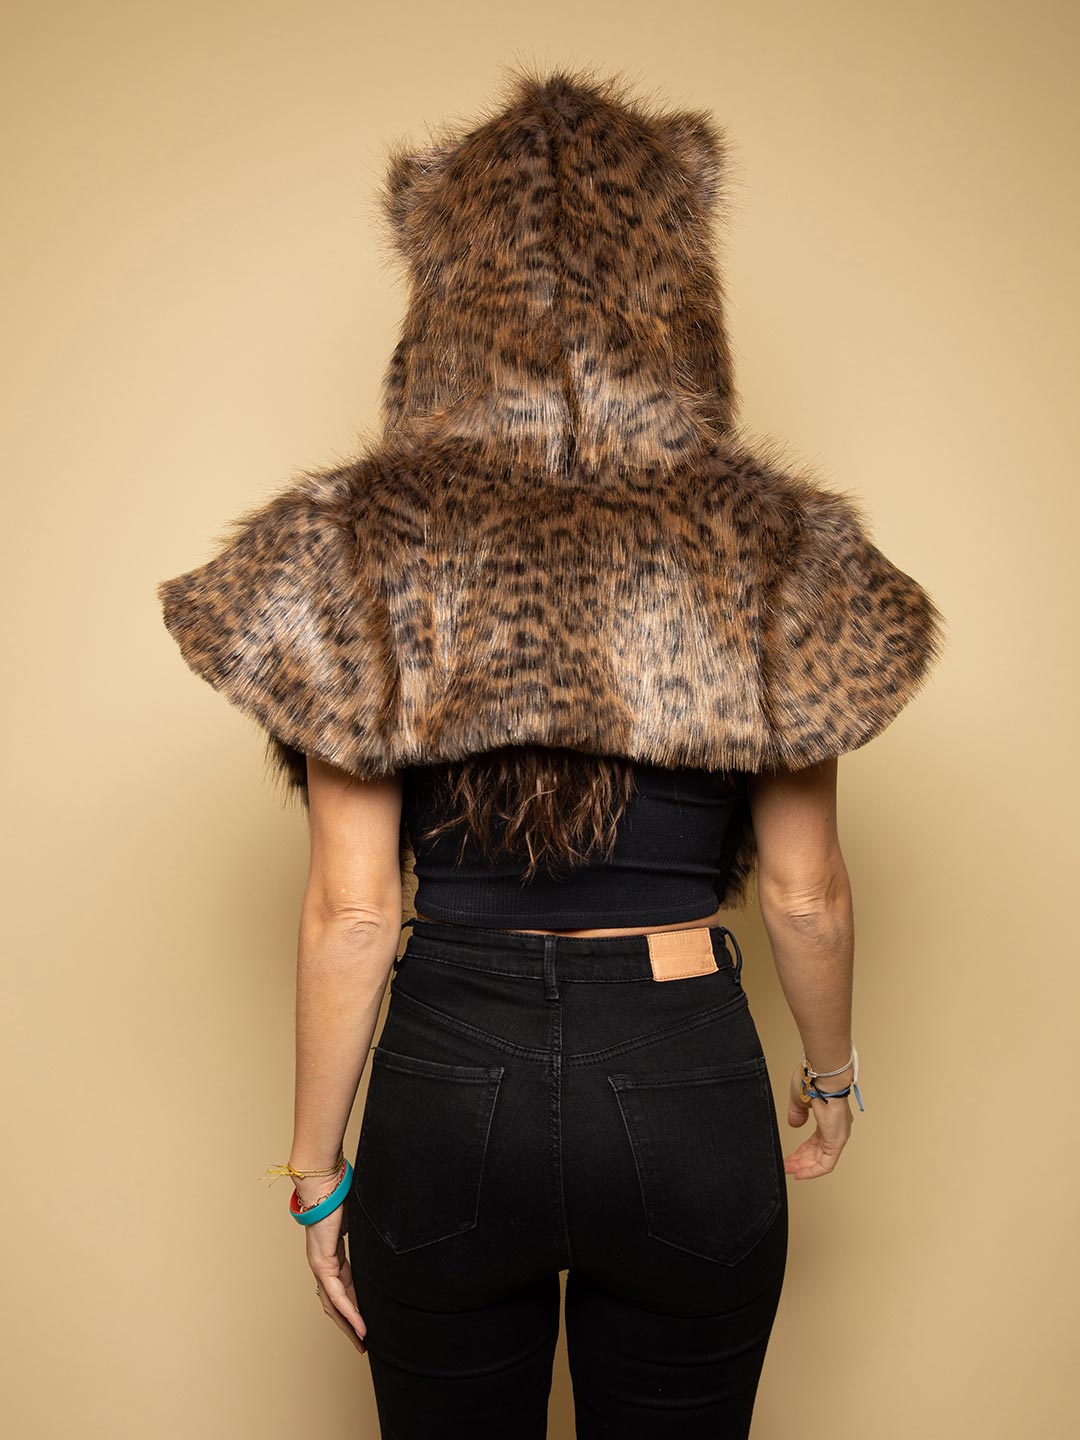 Back View of Savannah Cat Faux Fur SpiritHoods Shawl with Hood